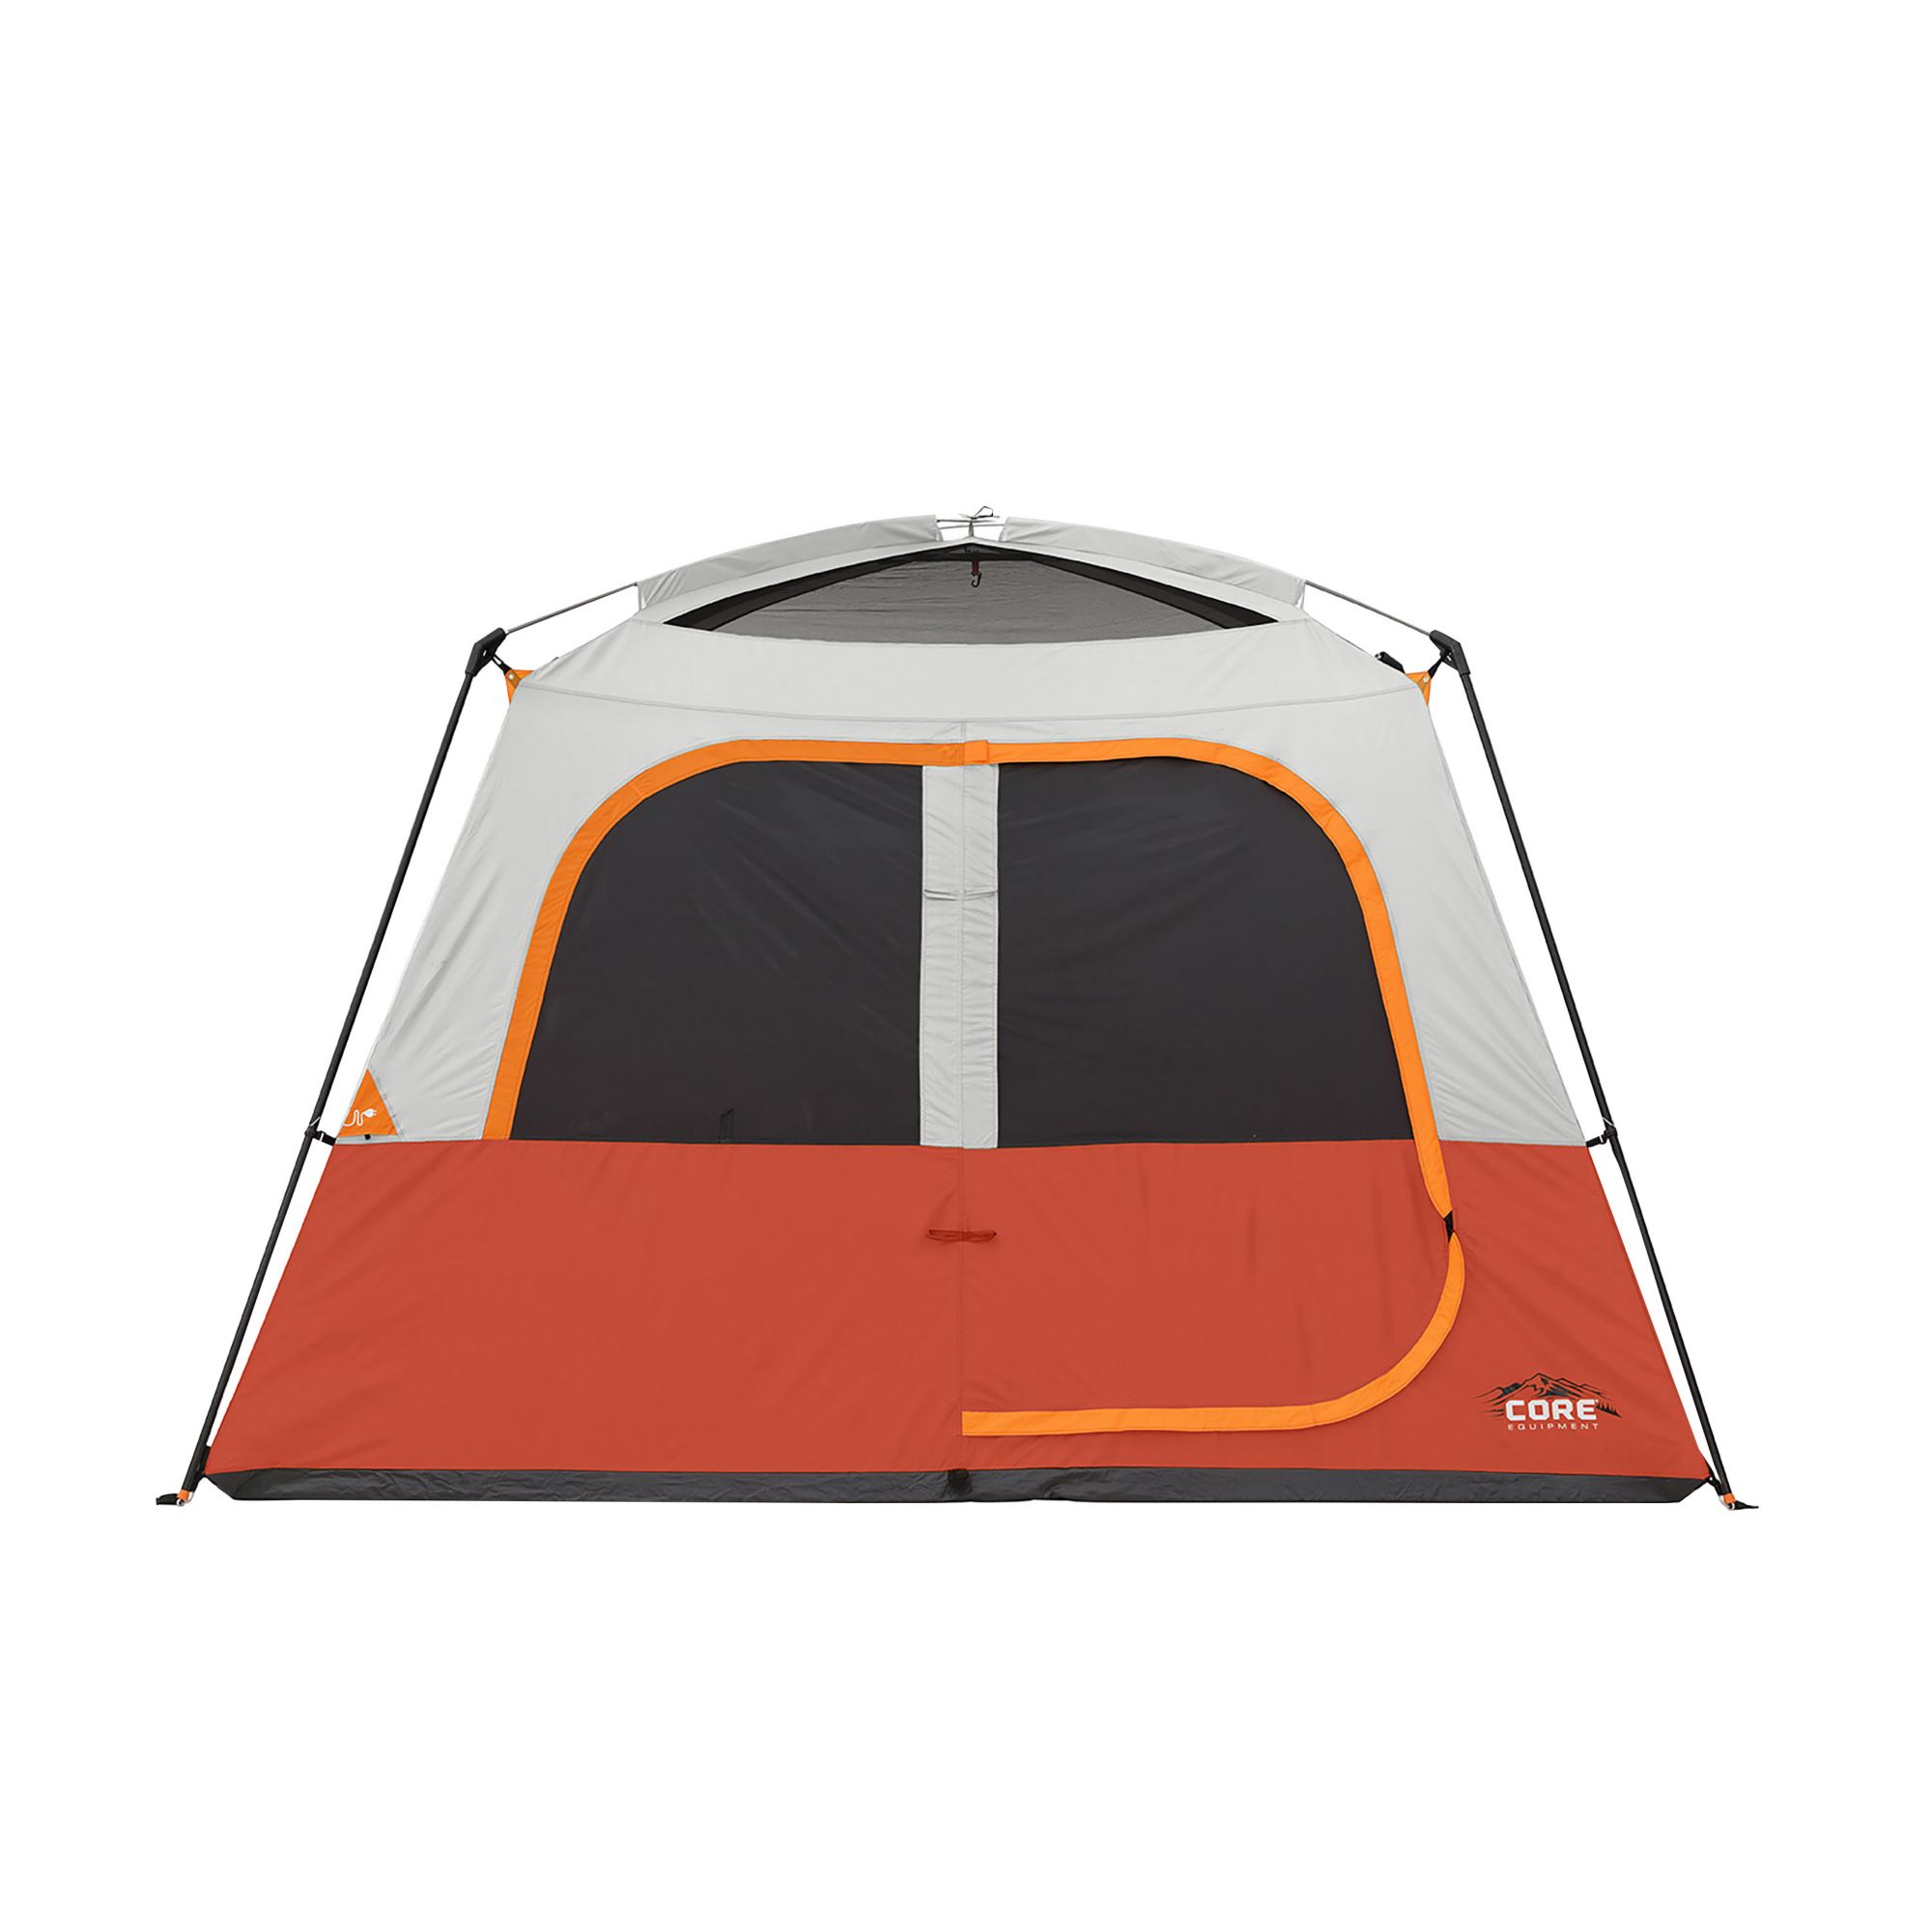 CORE 10' x 9' Straight Wall Cabin Tent for 6